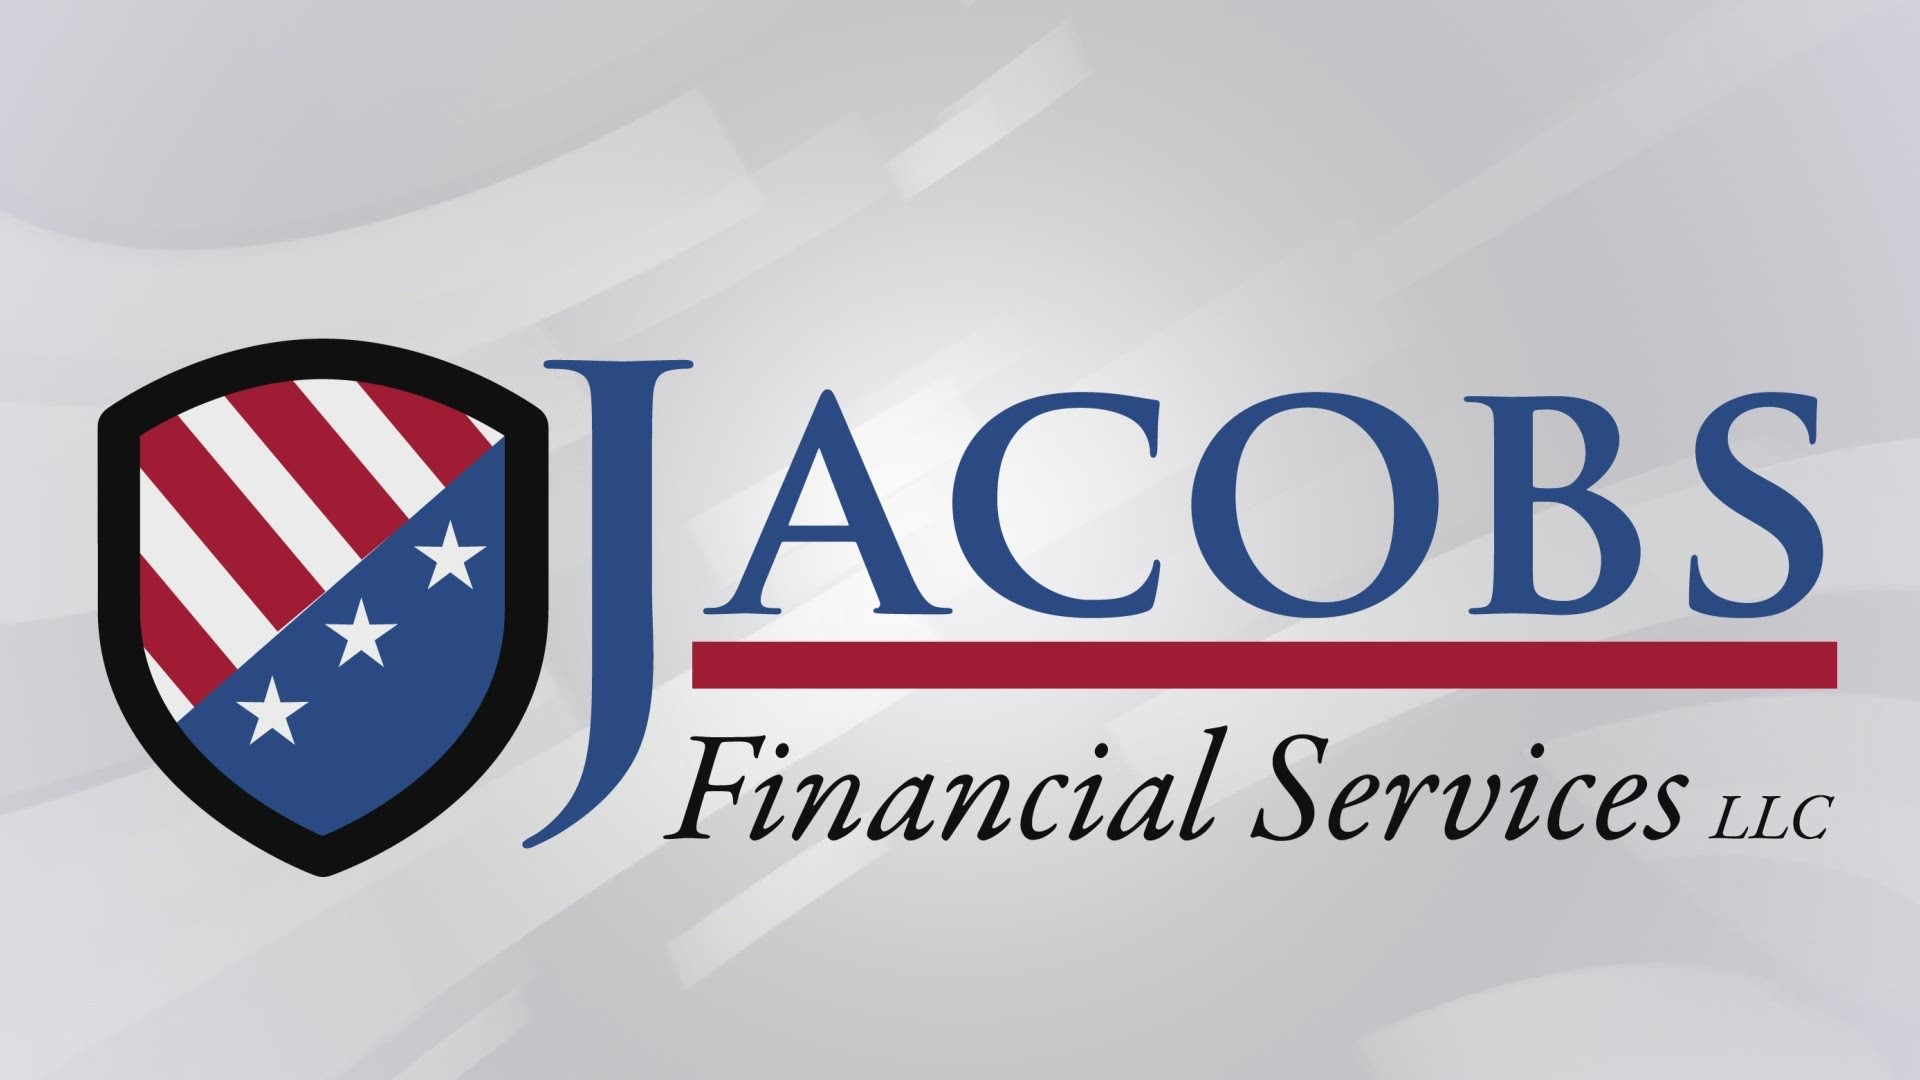 Tom Jacobs, from Jacobs Financial Services, says that is the process for creating a retirement income strategy.